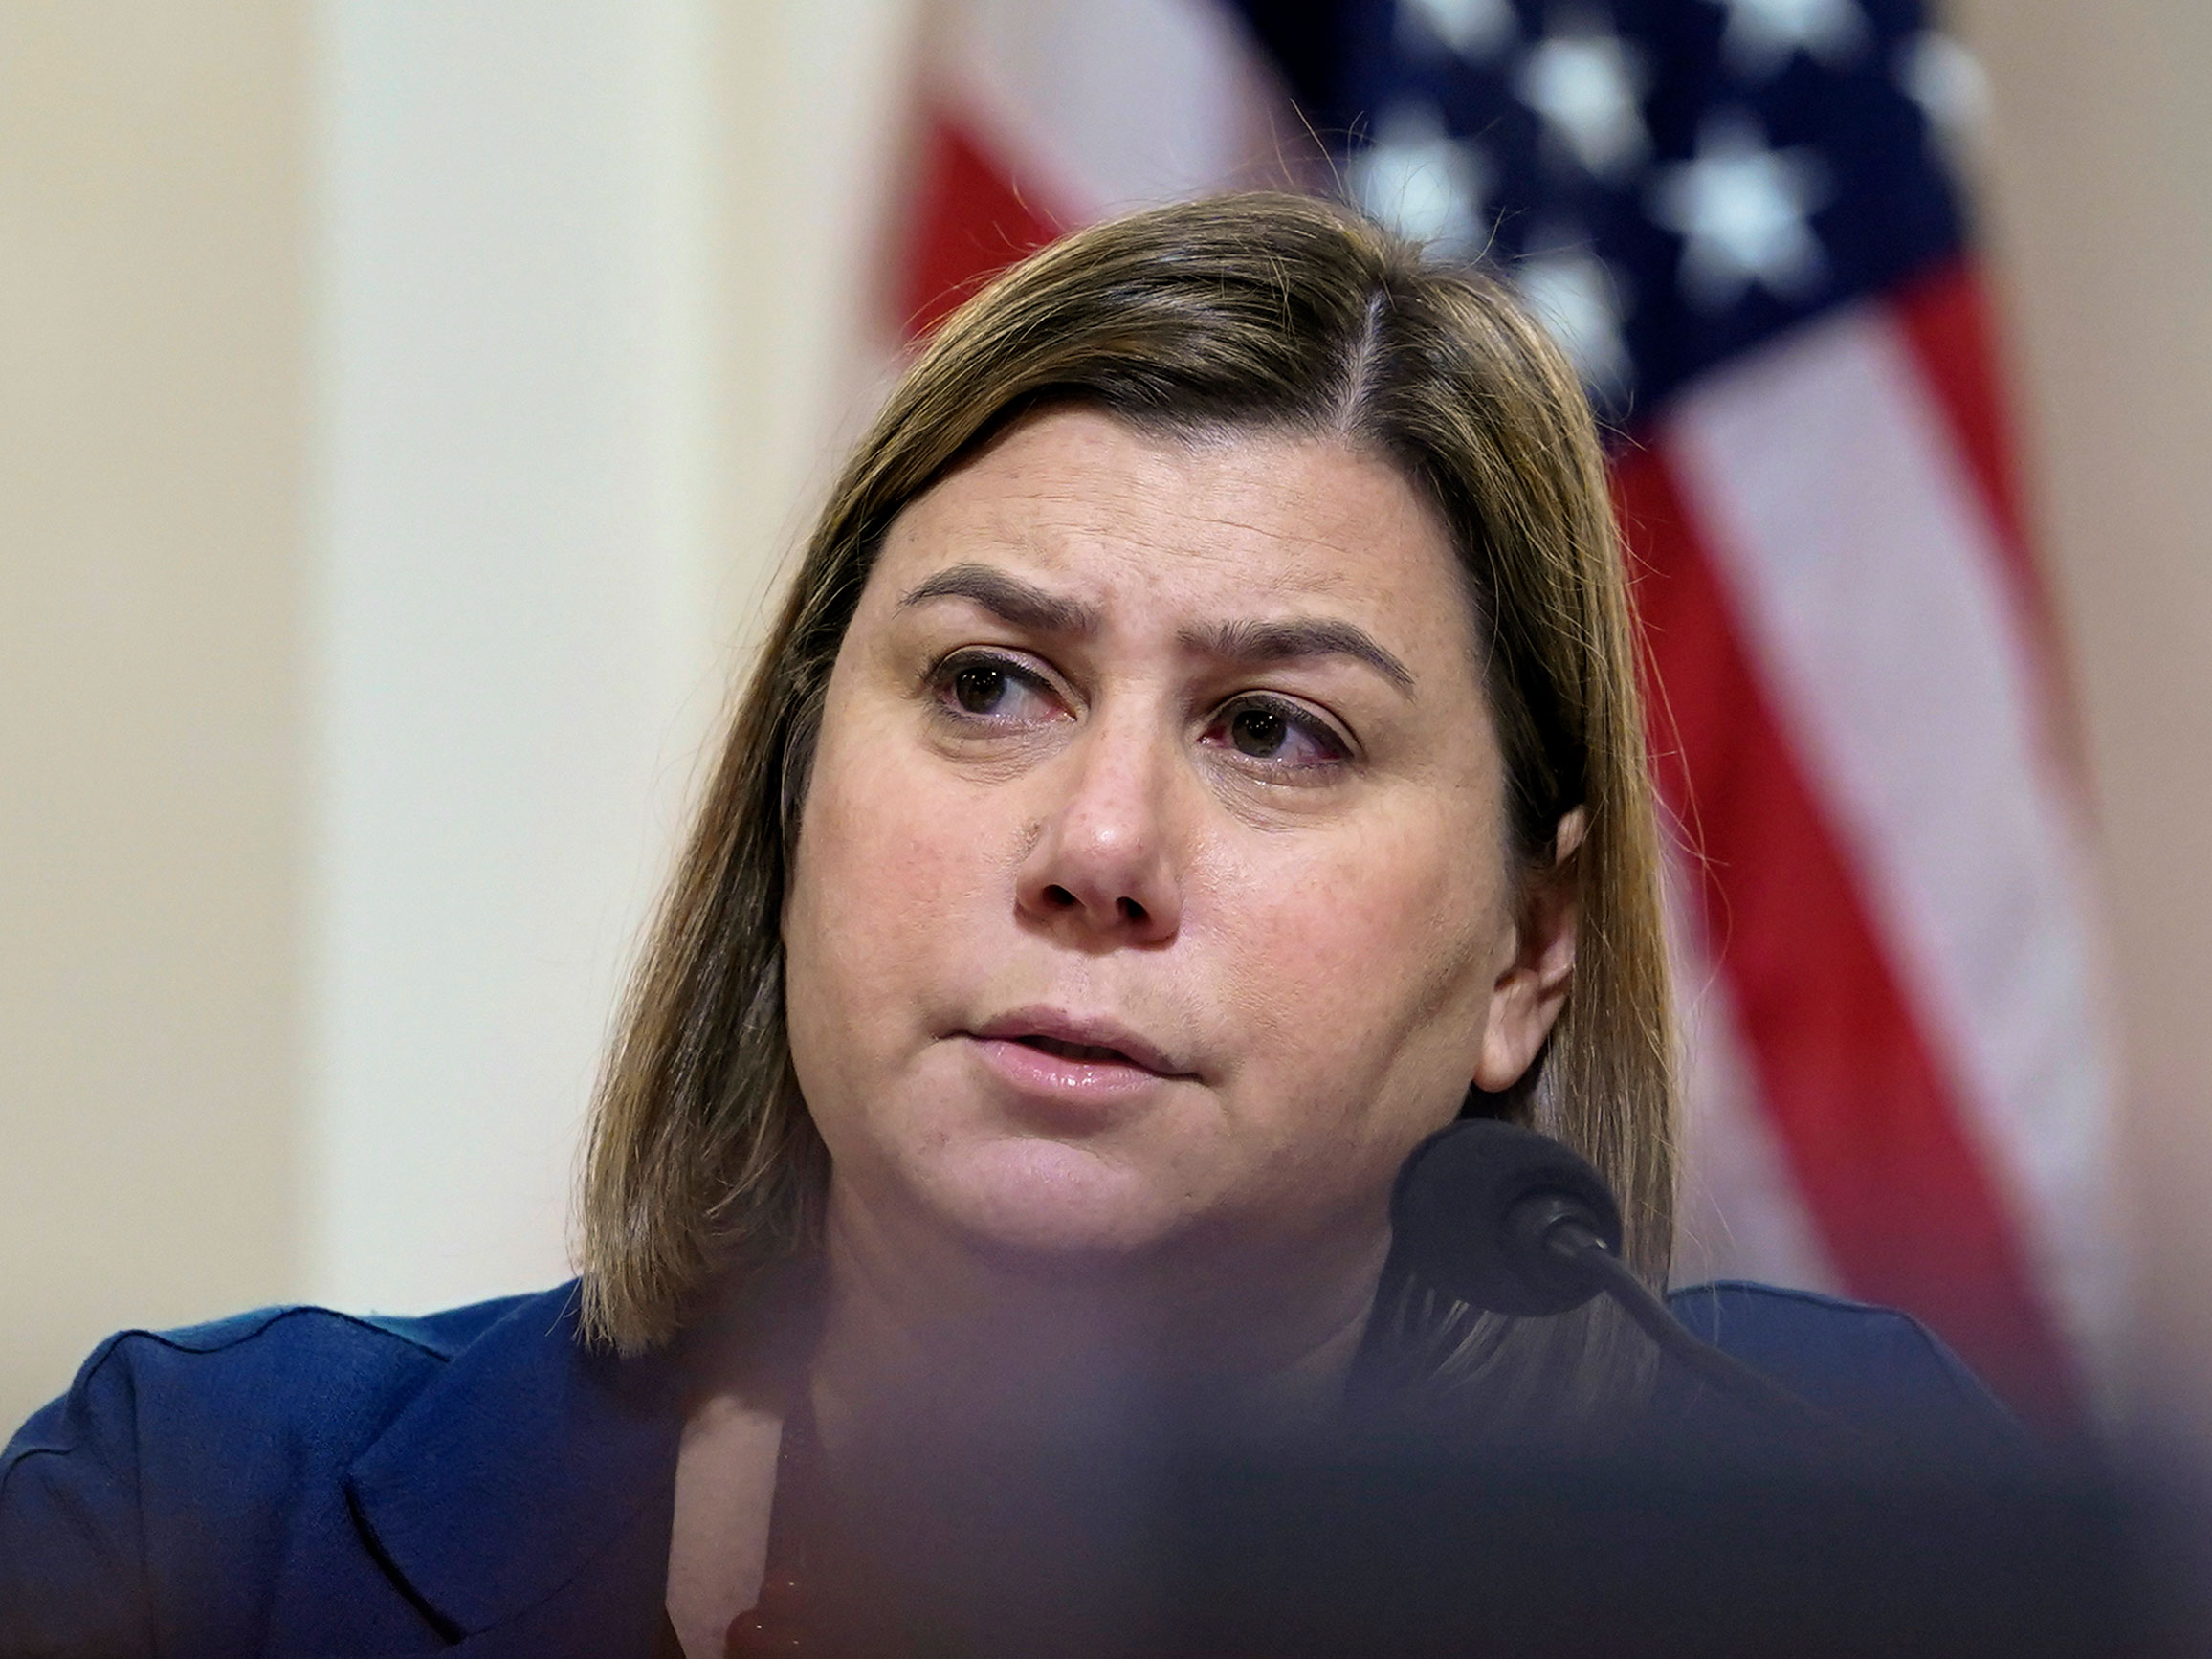 Rep. Elissa Slotkin asks question during a House Homeland Security Committee hearing in Washington, DC, on November 15, 2022.